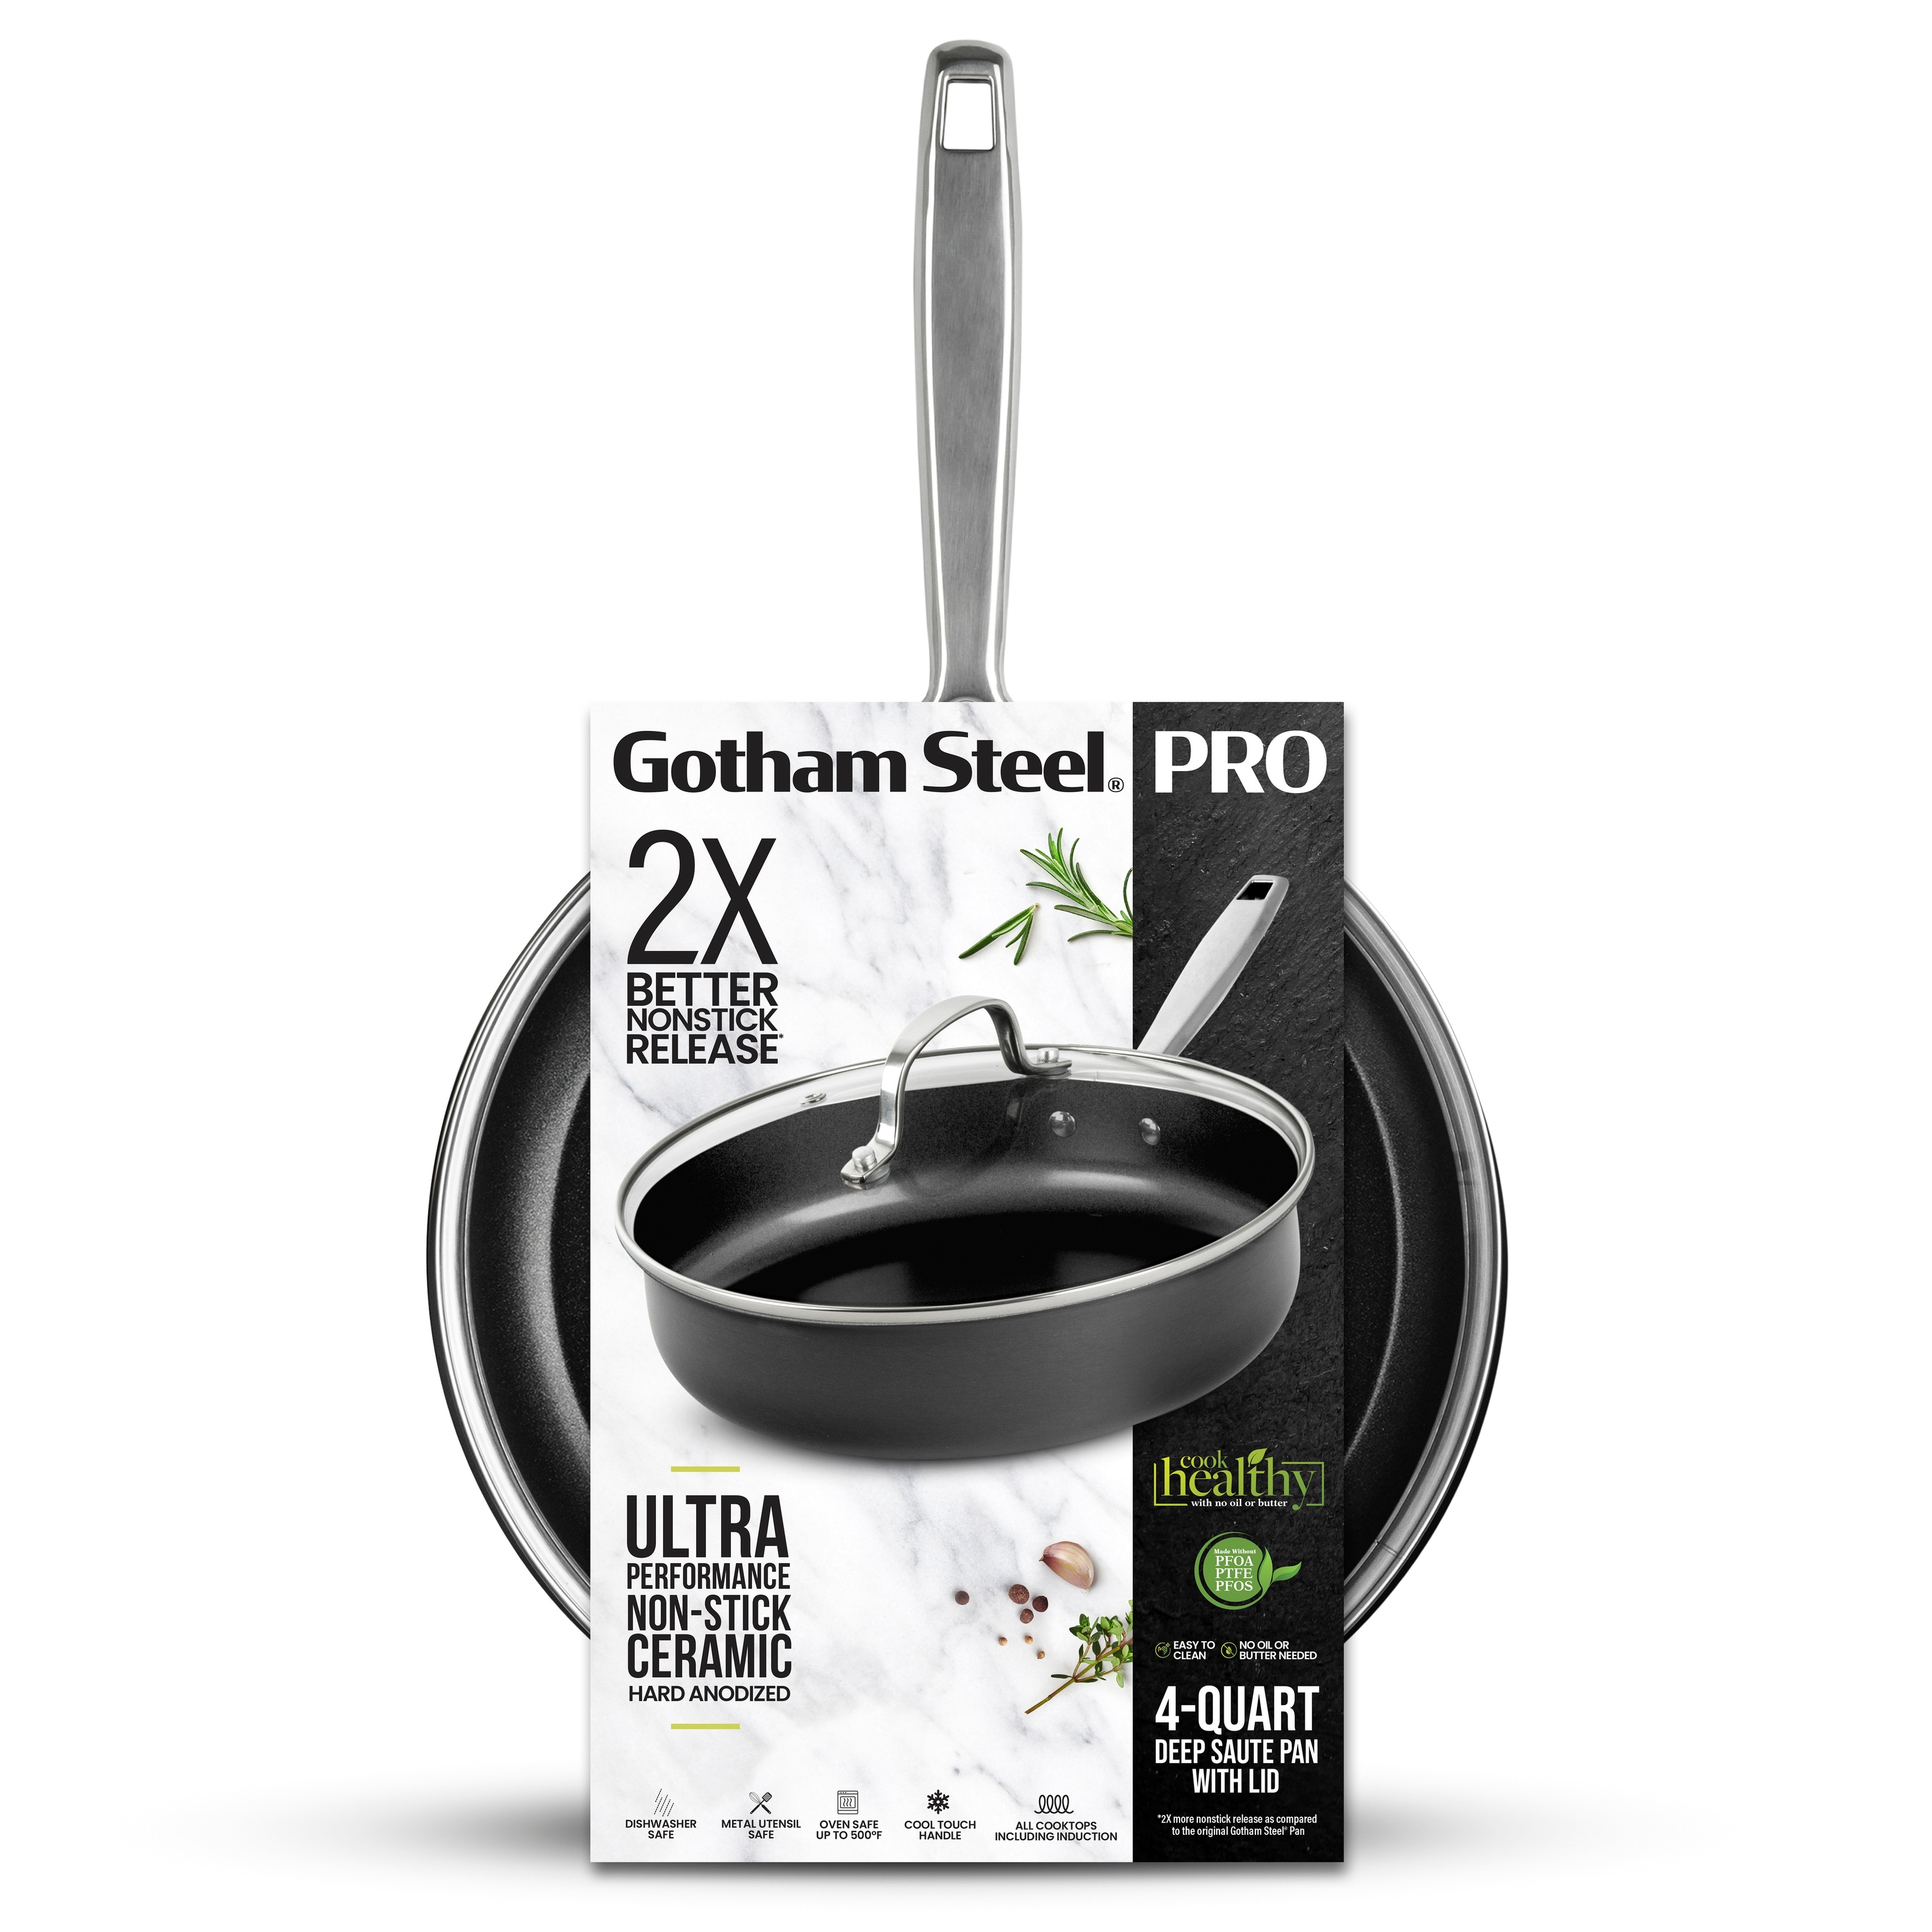 https://ak1.ostkcdn.com/images/products/is/images/direct/32a08b632562e9bf706894eb3081a79f147d18b8/Gotham-Steel-Pro-Ultra-Ceramic-2X-4-Qt-Deep-Saute-Nonstick-Pan-with-Lid.jpg